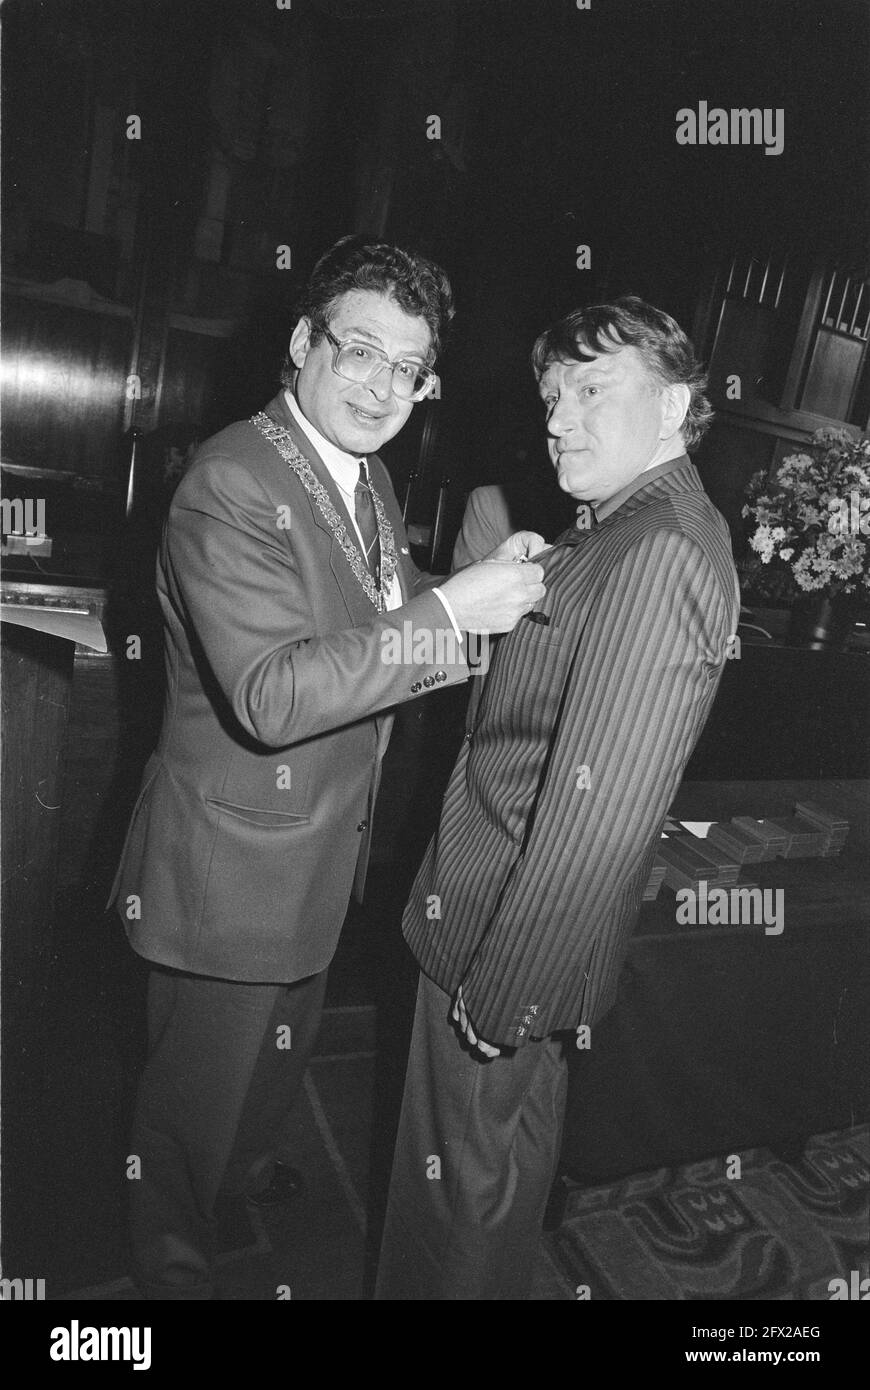 Ribbon Reaping; mayor Van Thijn presents award to Peter Oosthoek (director), April 27, 1984, Directors, mayors, ribbon reaping, awards, The Netherlands, 20th century press agency photo, news to remember, documentary, historic photography 1945-1990, visual stories, human history of the Twentieth Century, capturing moments in time Stock Photo